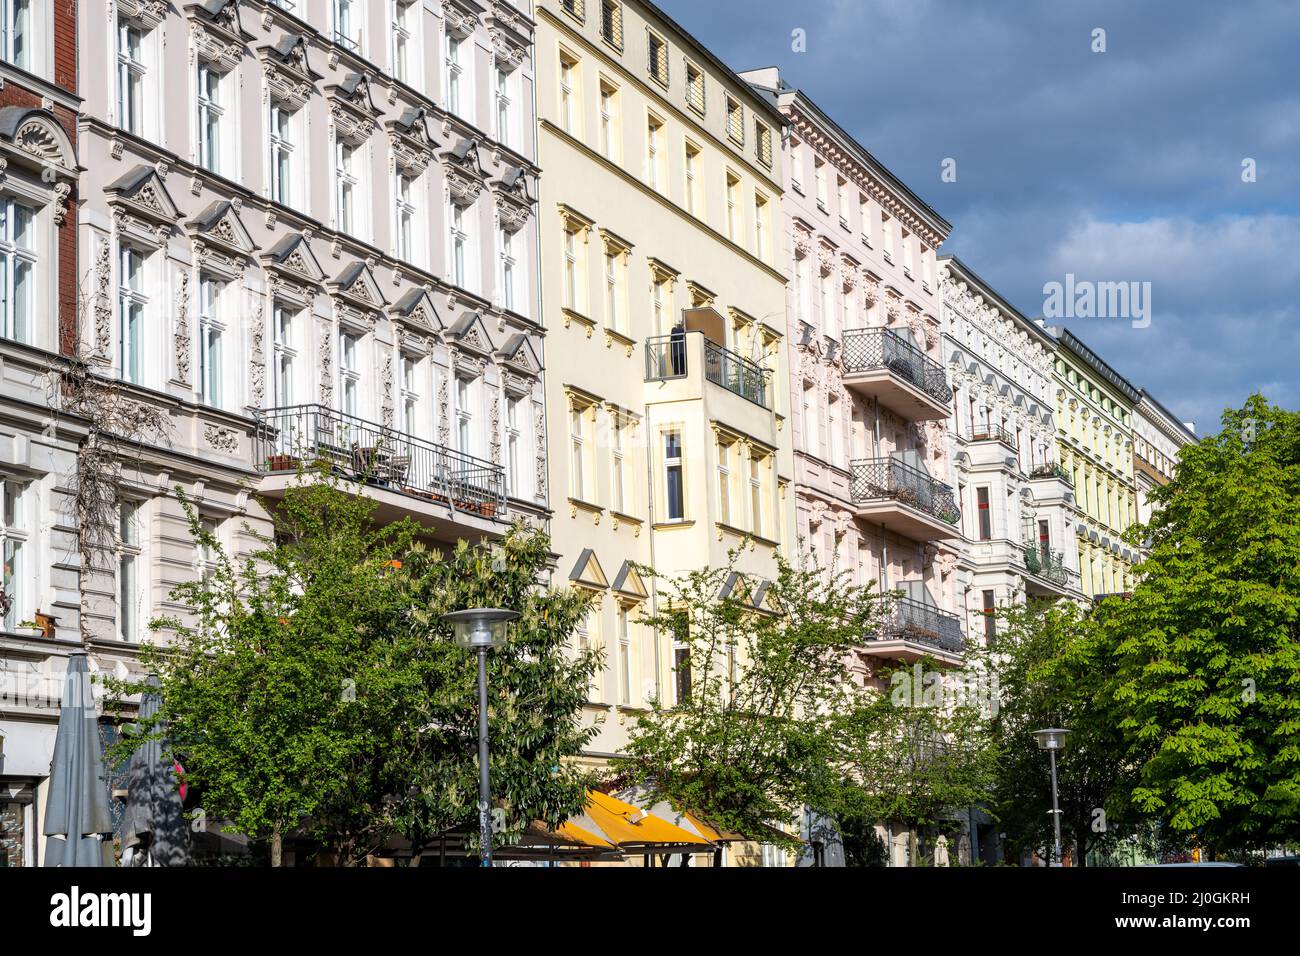 Some renovated old apartment buildings seen in Prenzlauer Berg, Berlin Stock Photo